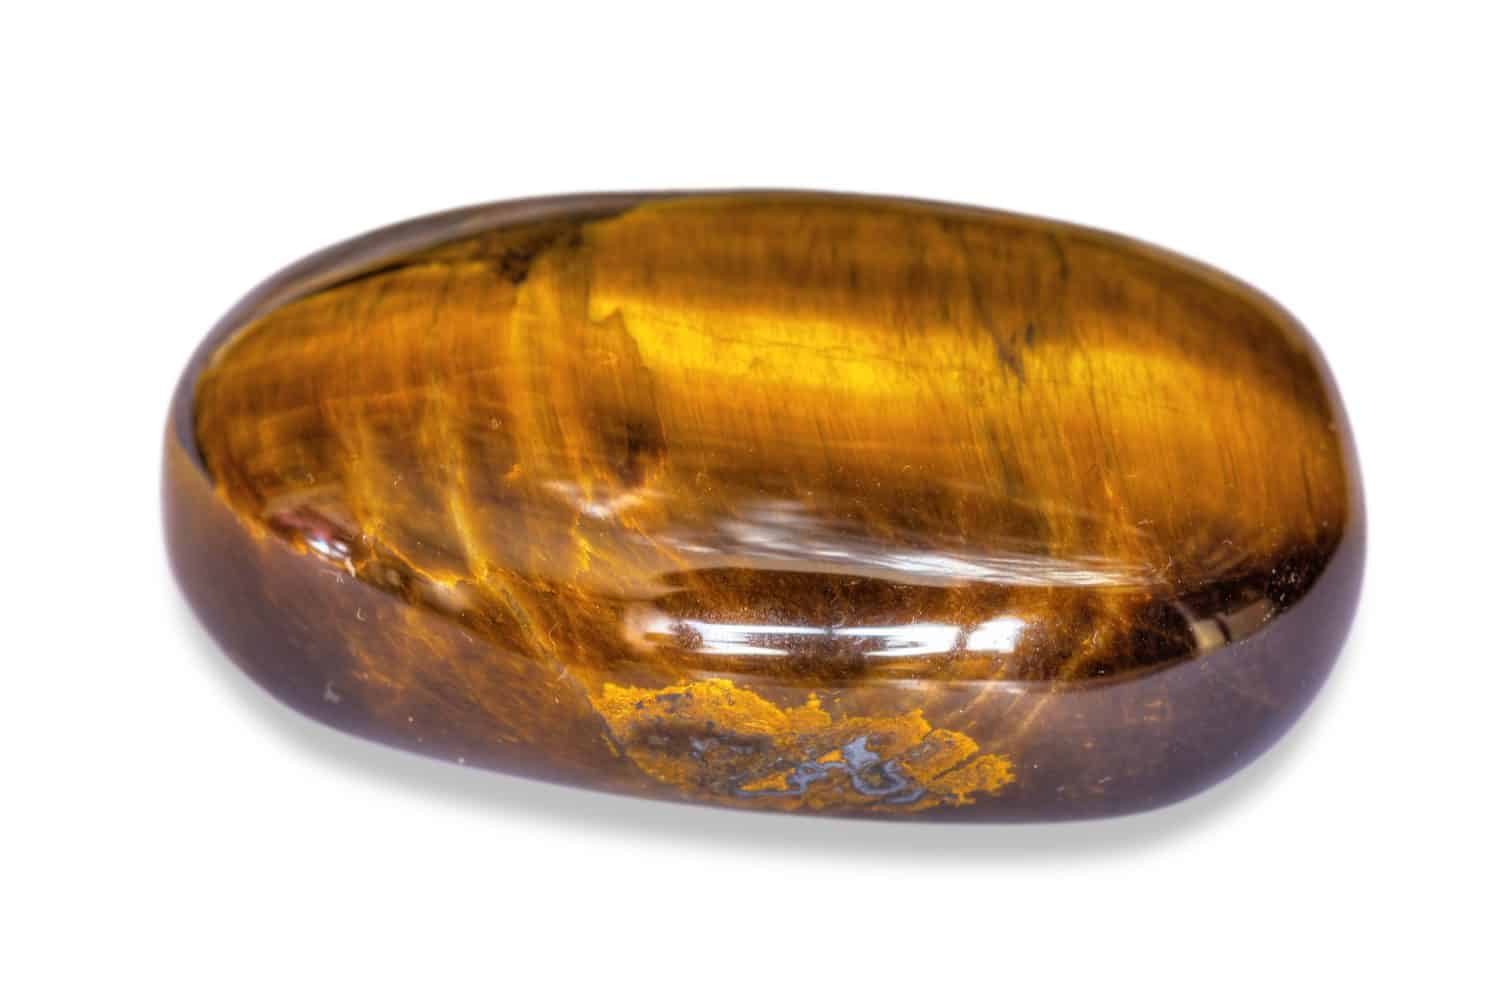 The semi-precious stone Tiger's Eye, polished, on a white background.